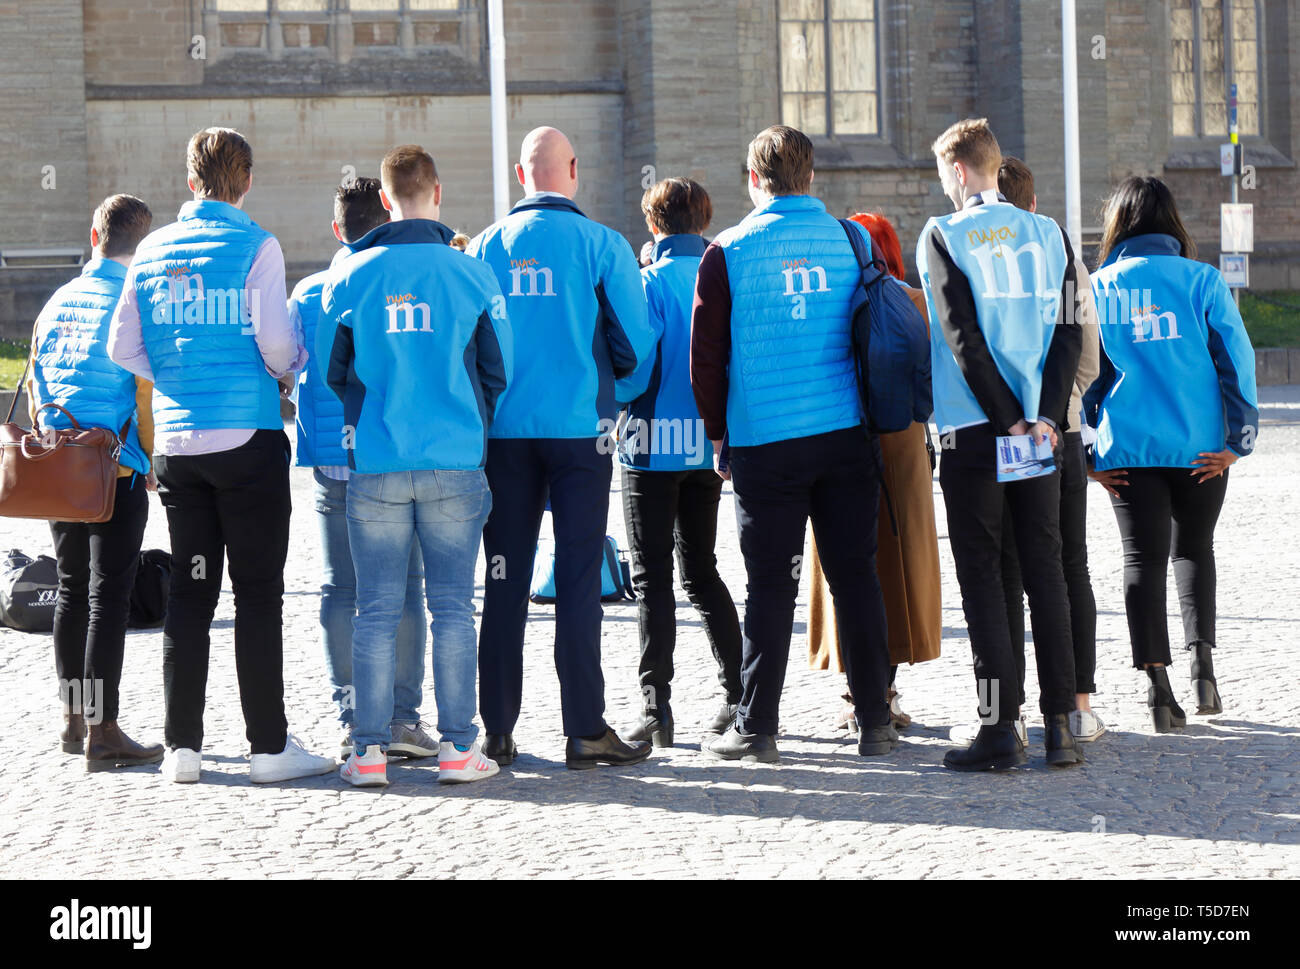 Orebro, Sweden - April 17, 2019: Members of the Swedish political conservative party Moderaterna with their backs turned to the camera at the City hal Stock Photo